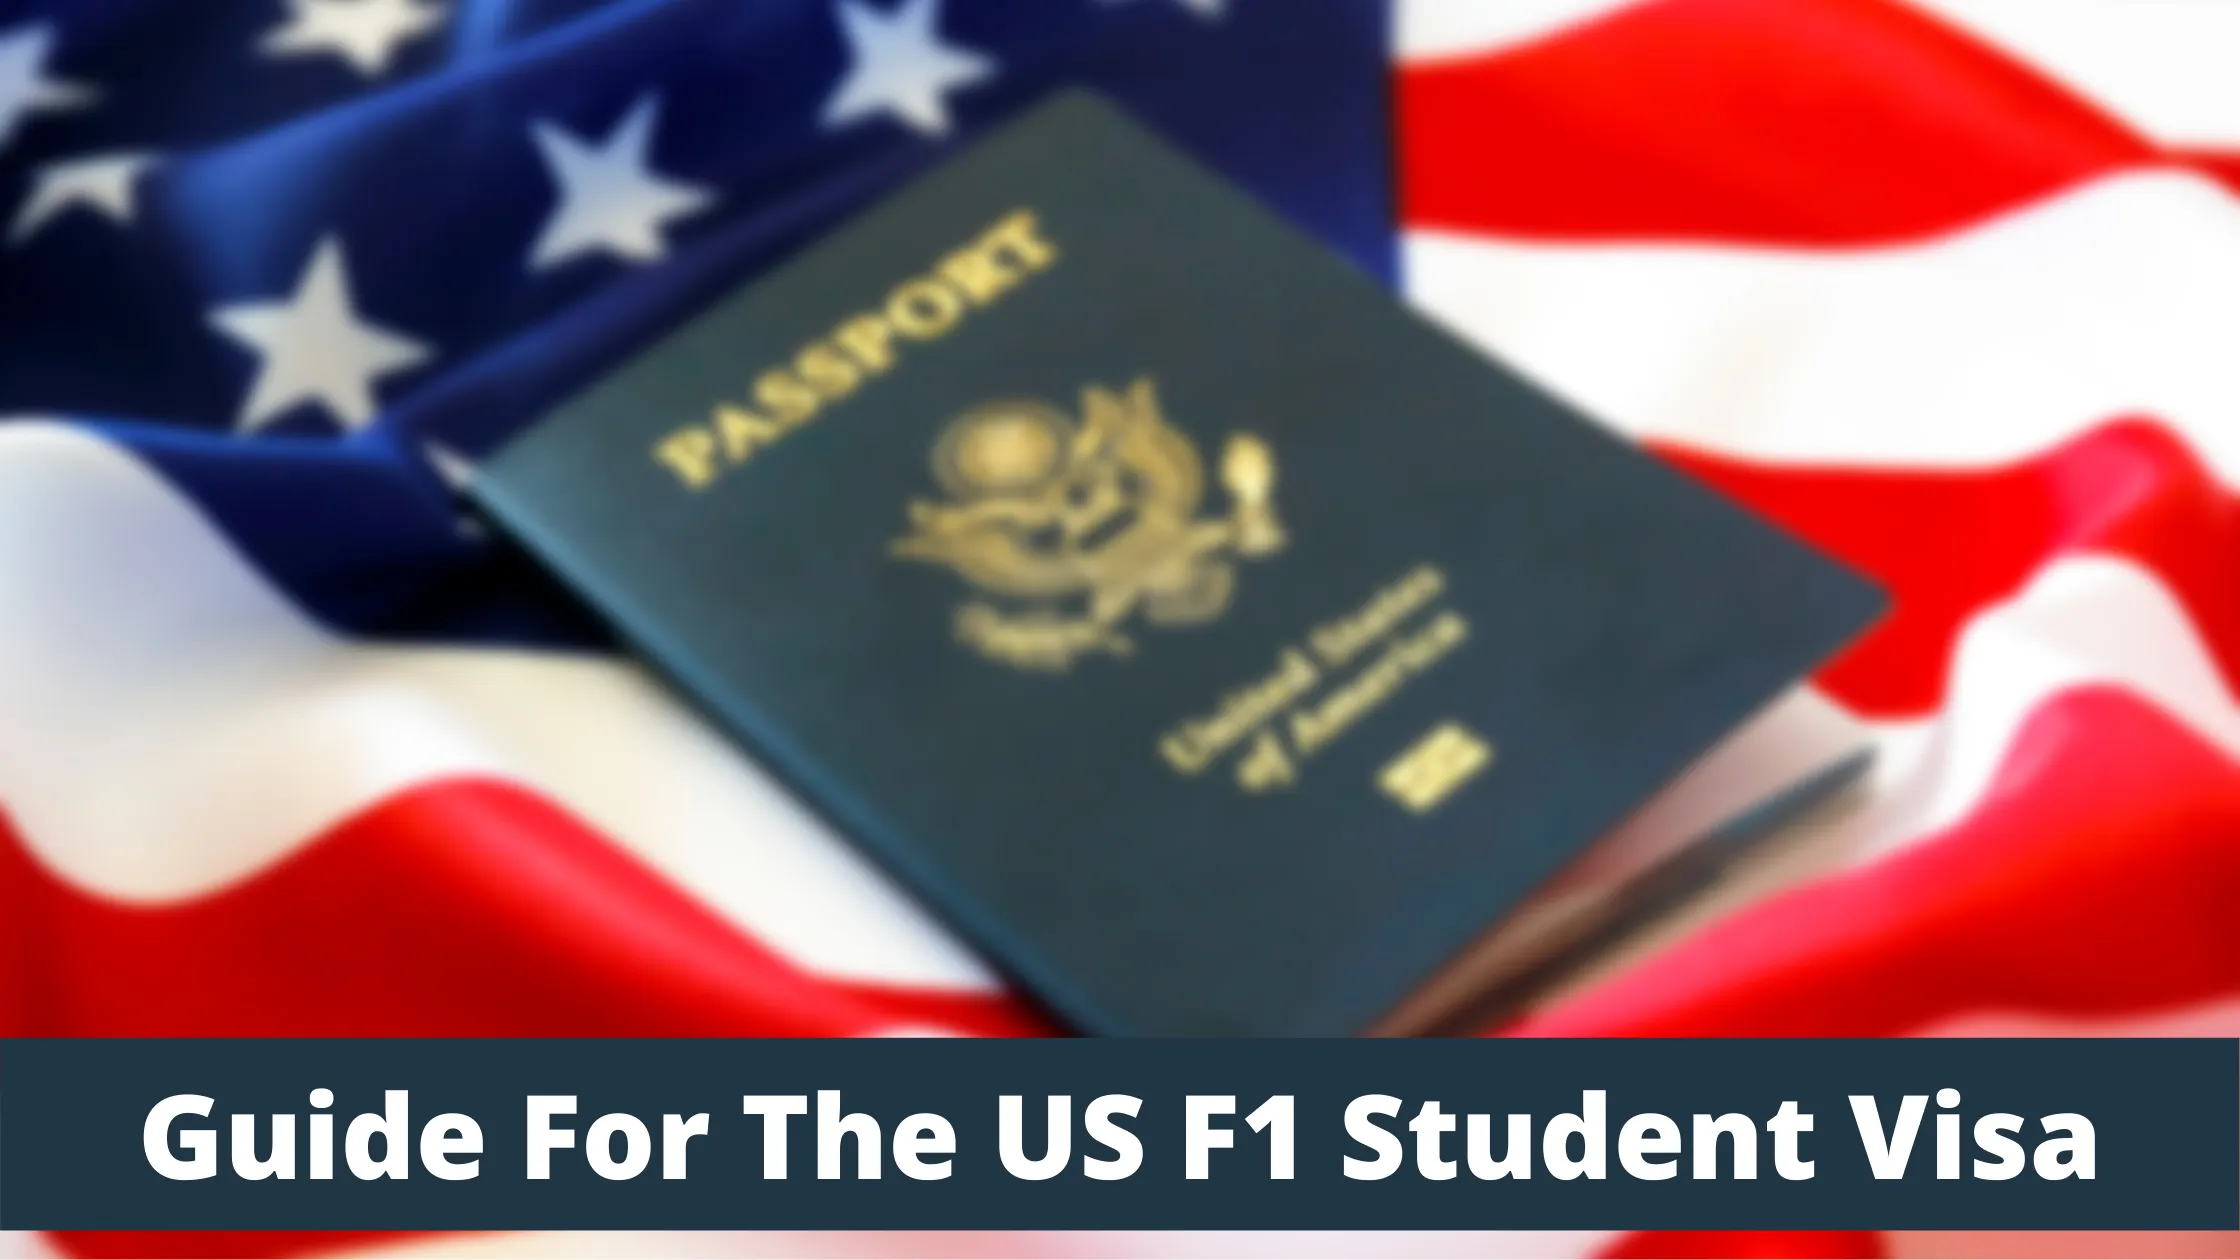 Guide For The US F1 Student Visa